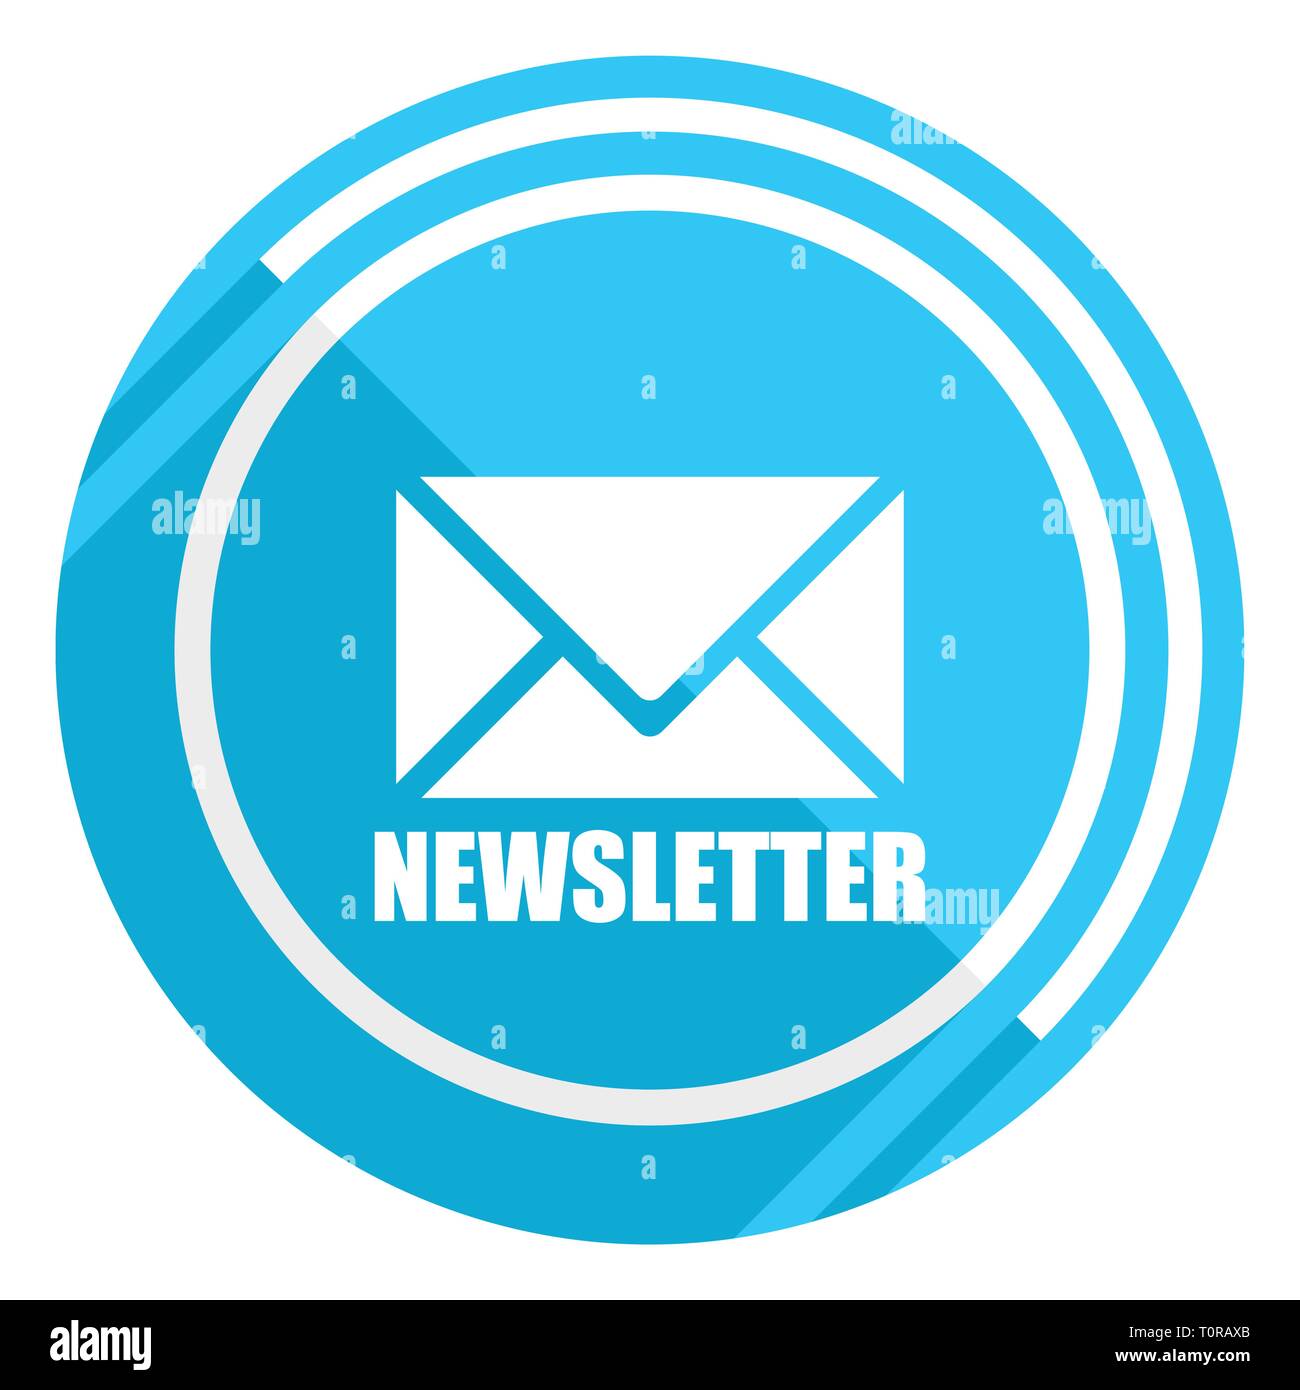 Newsletter Flat Design Blue Web Icon Easy To Edit Vector Illustration For Webdesign And Mobile Applications Stock Vector Image Art Alamy